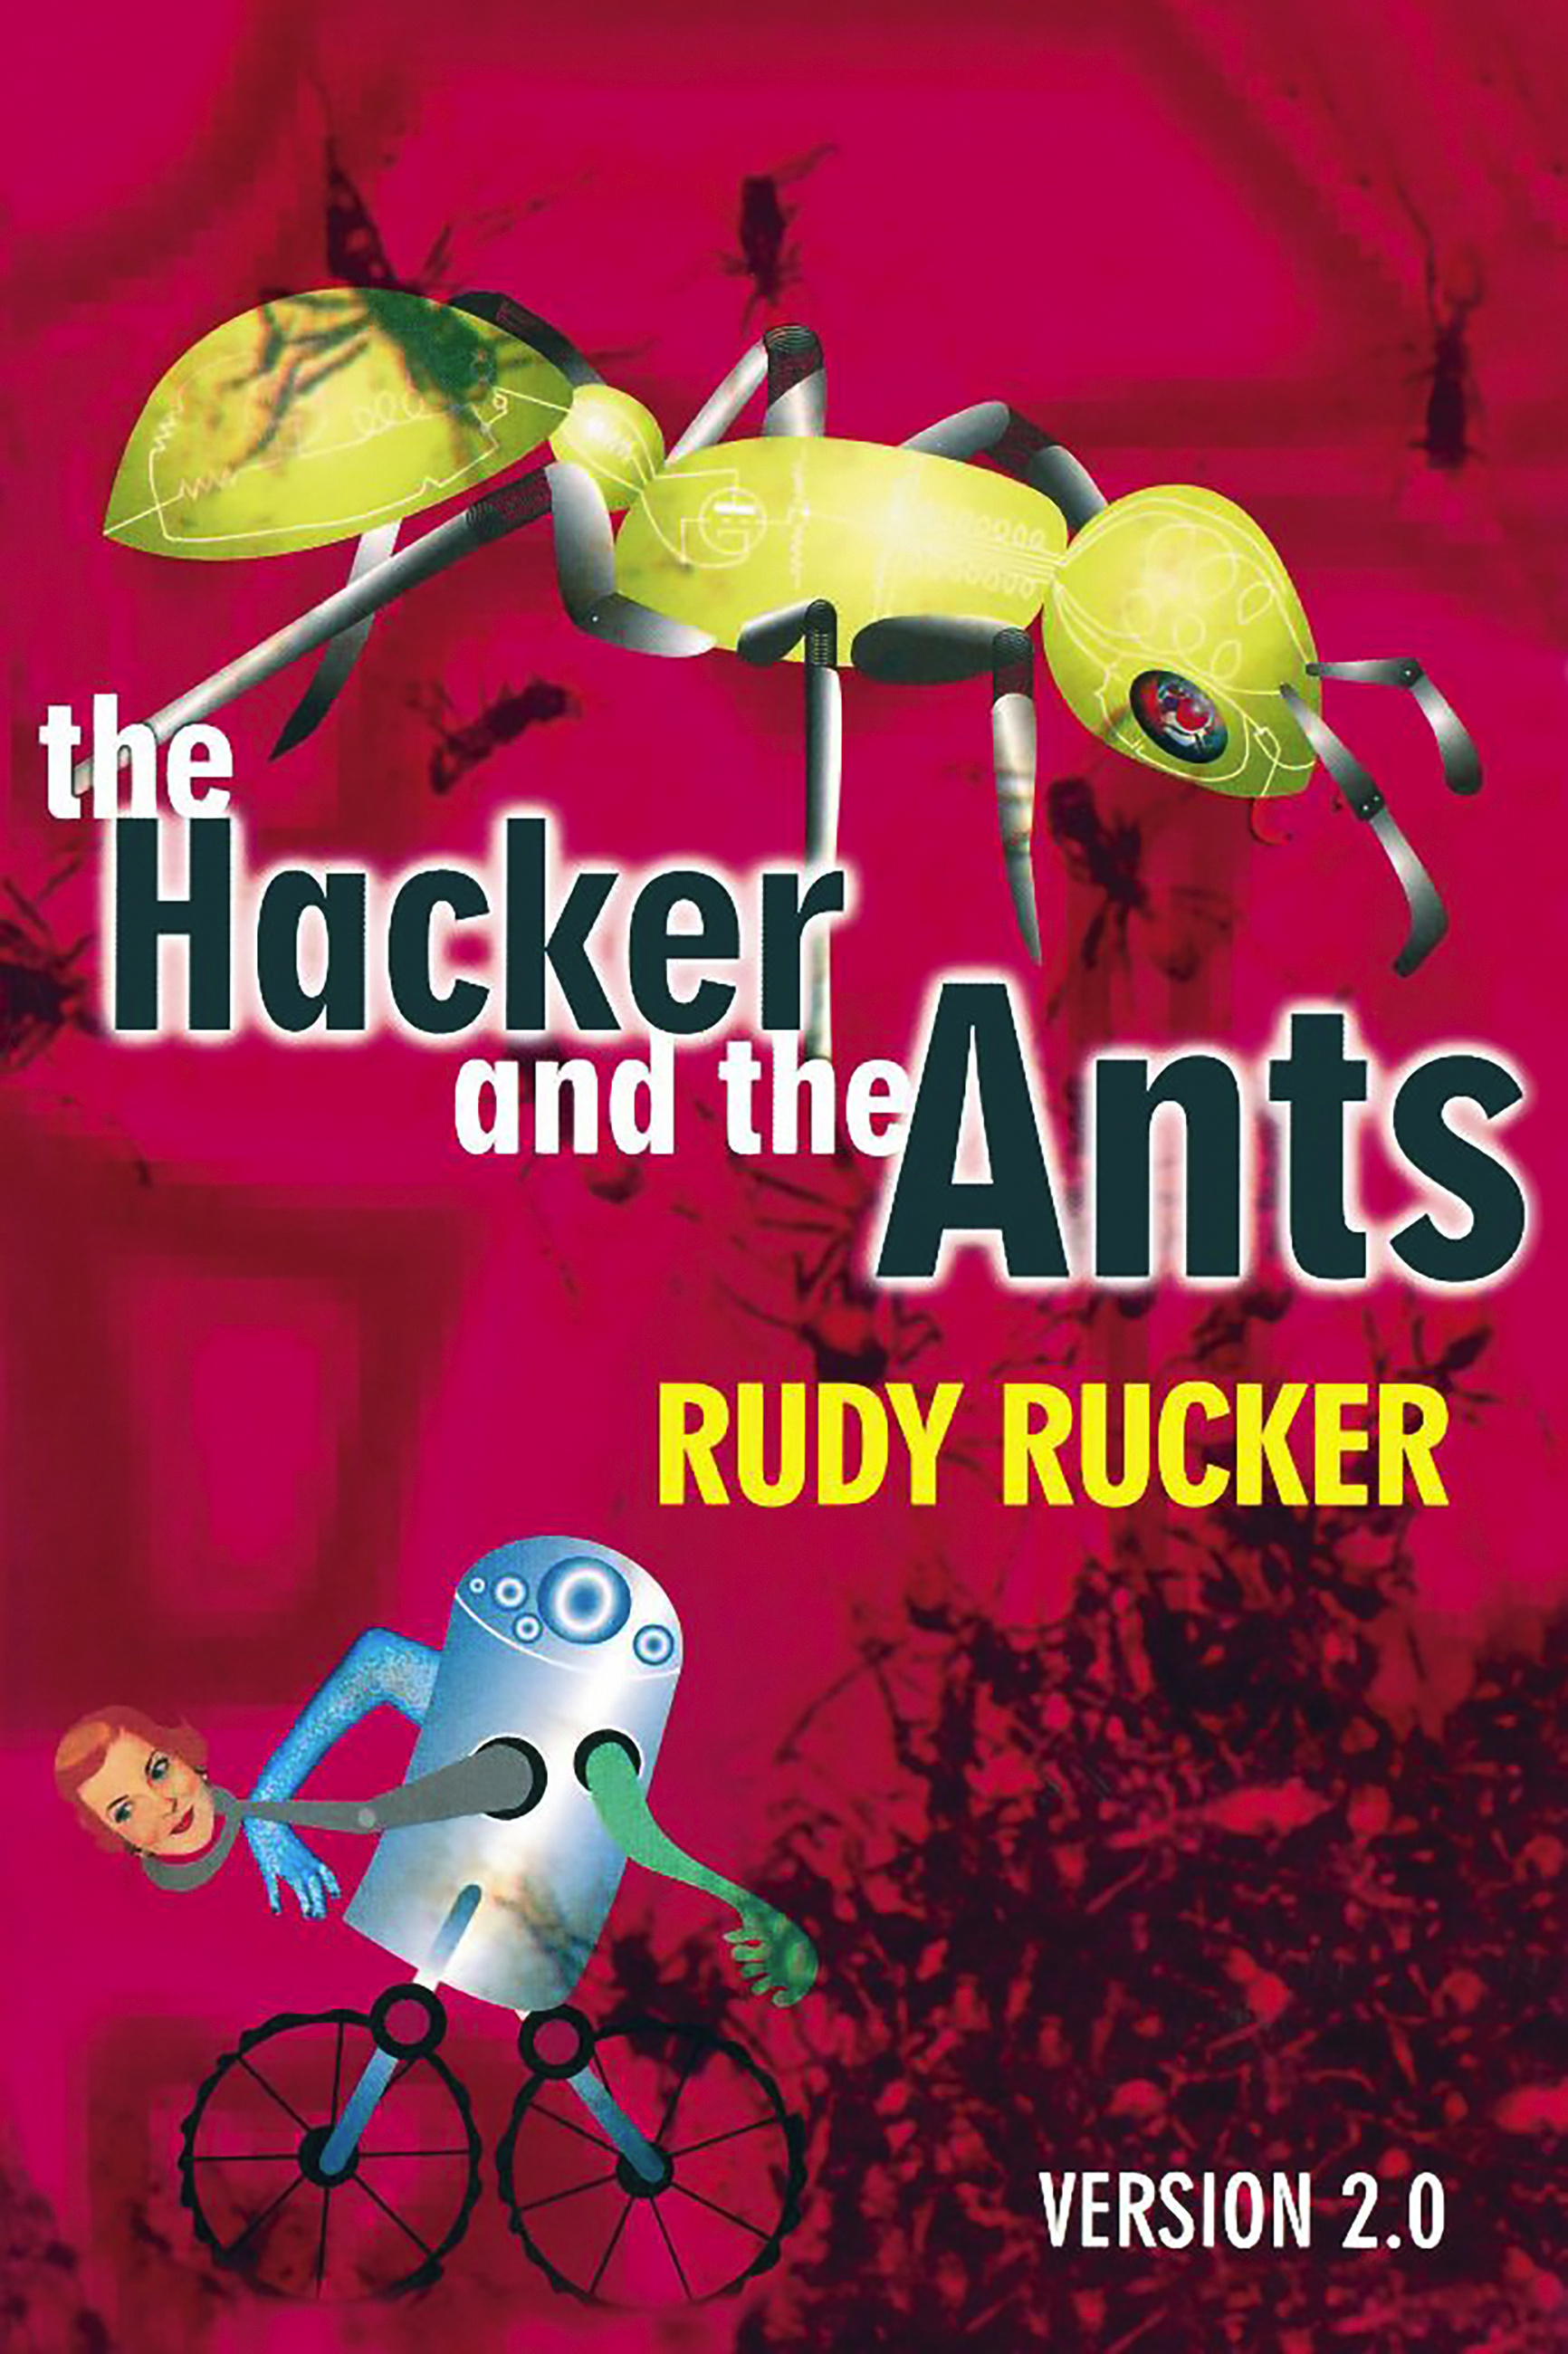 Teen Self Fisting - The Hacker and the Ants by Rudy Rucker | Hachette Book Group